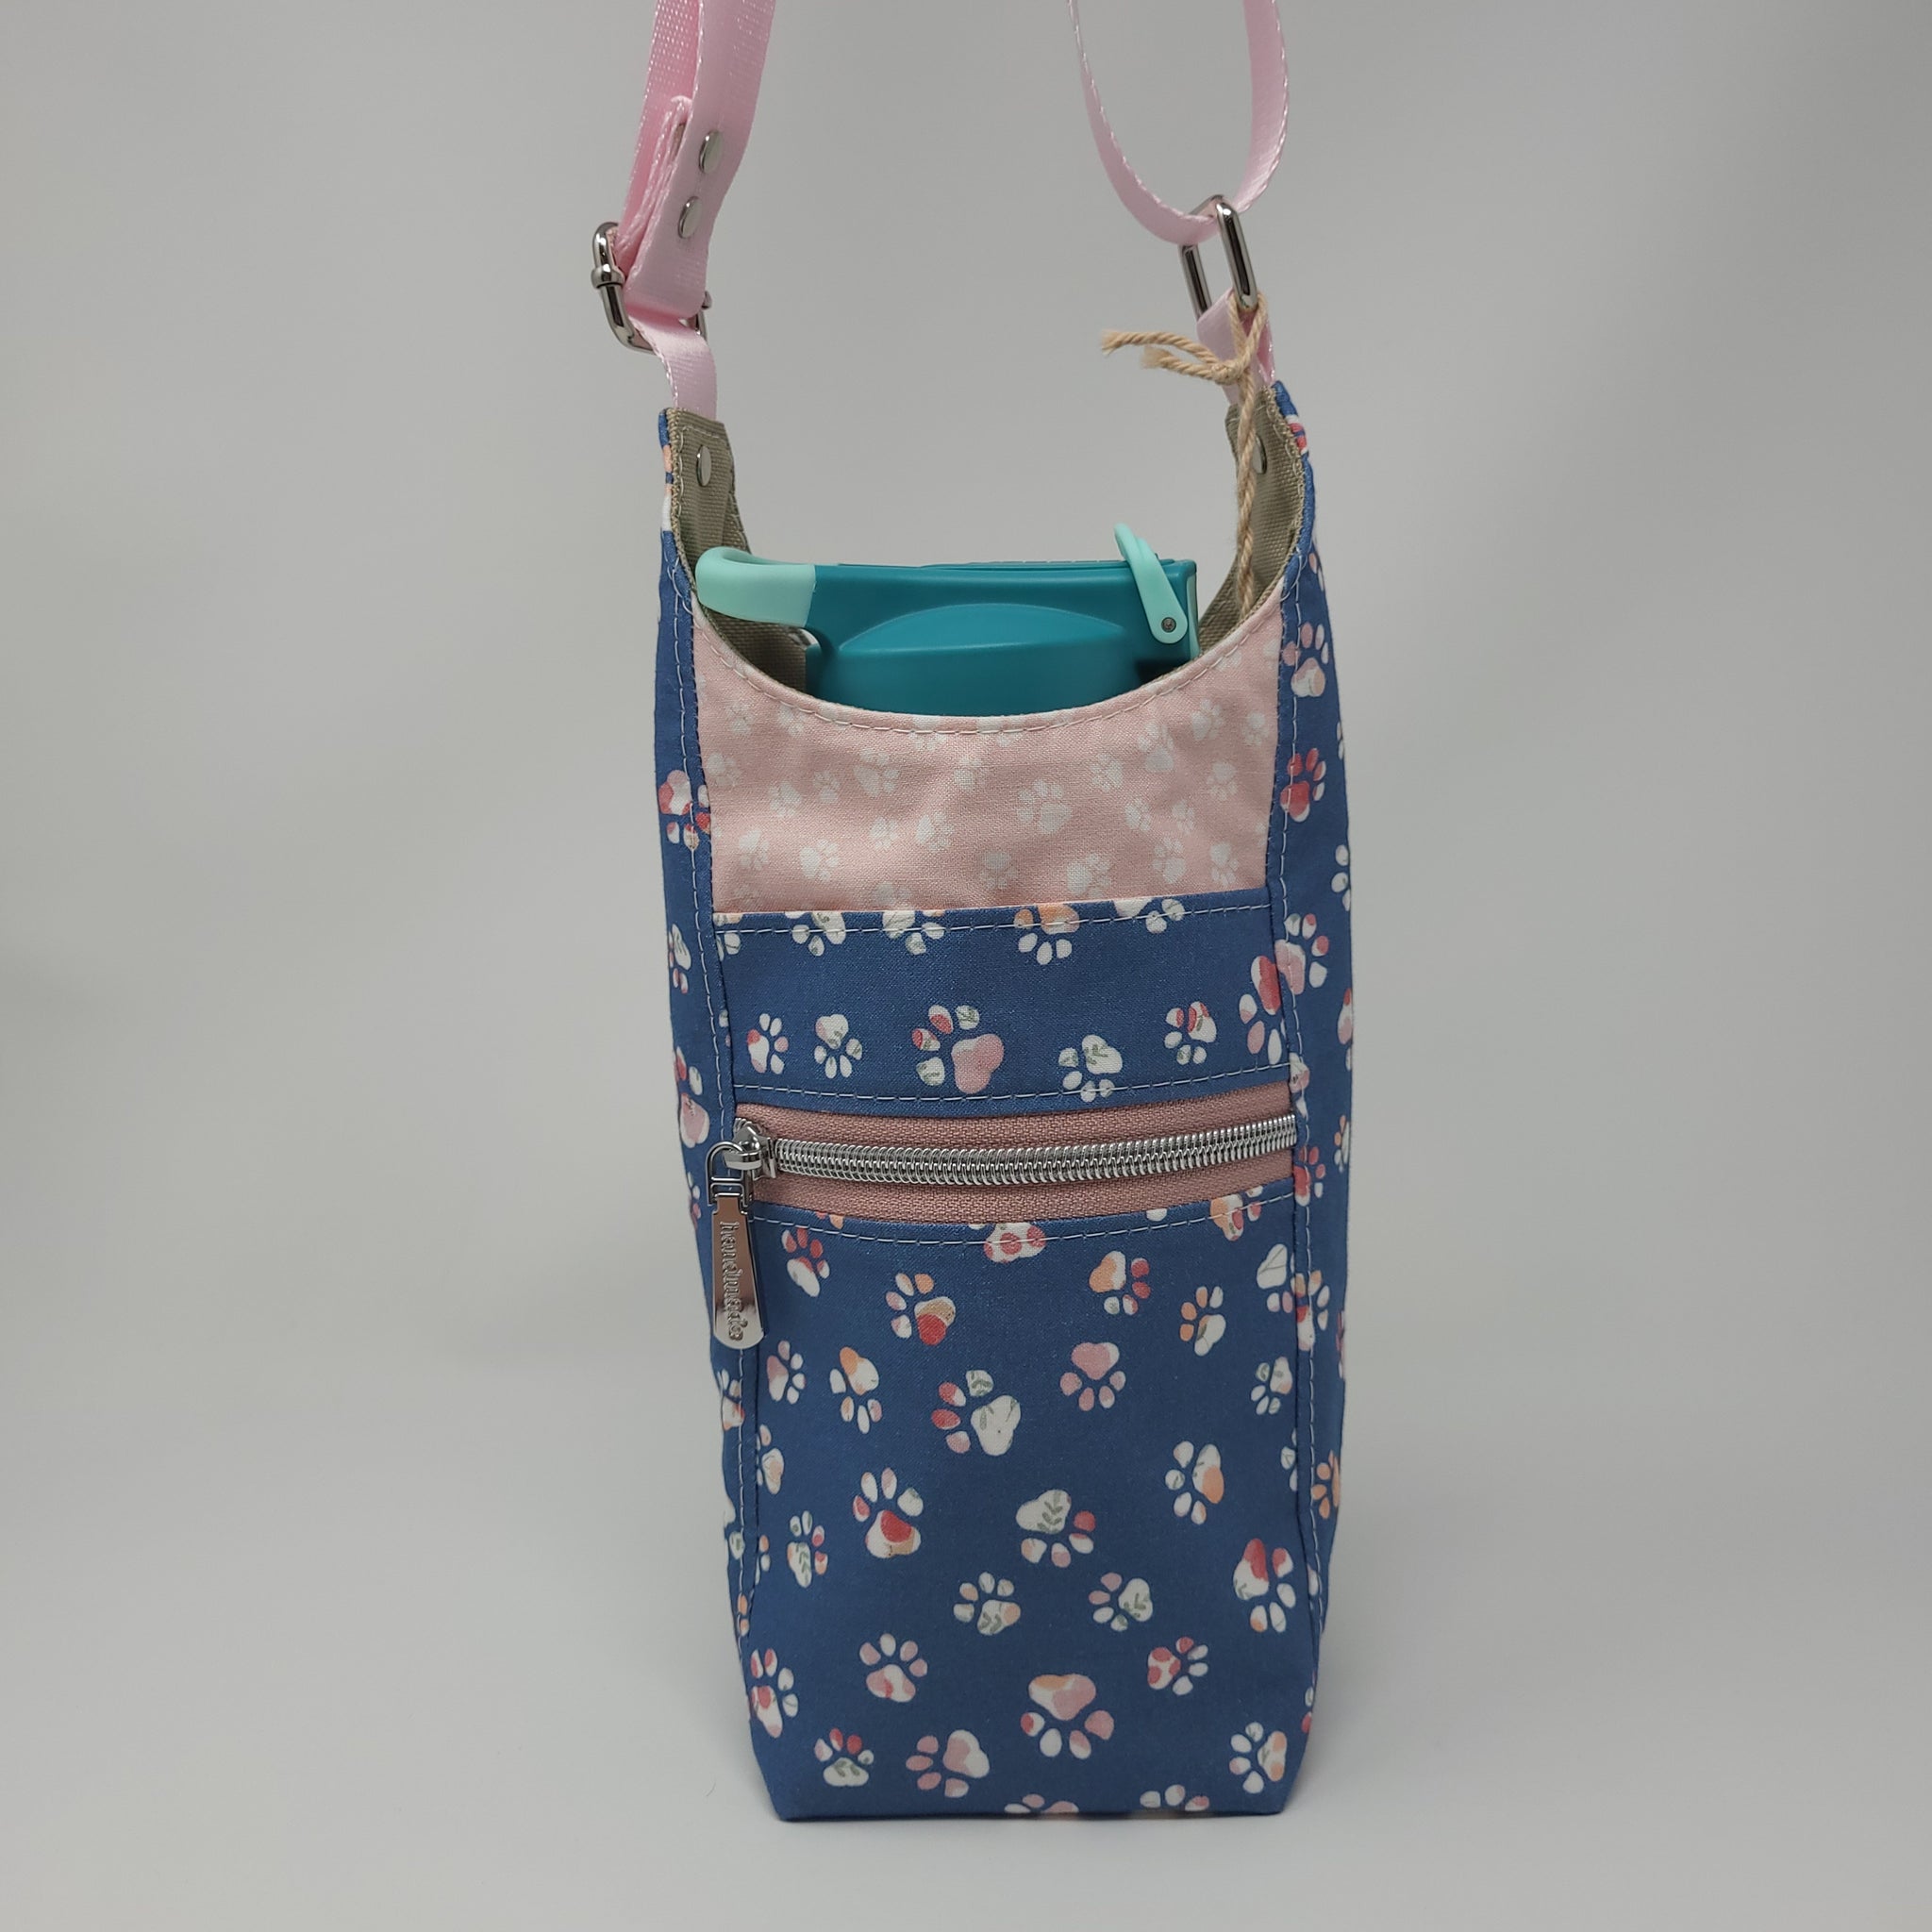 H2O2Go Crossbody Water Bottle Bag - Paw Please - Blue Floral Paw Prints